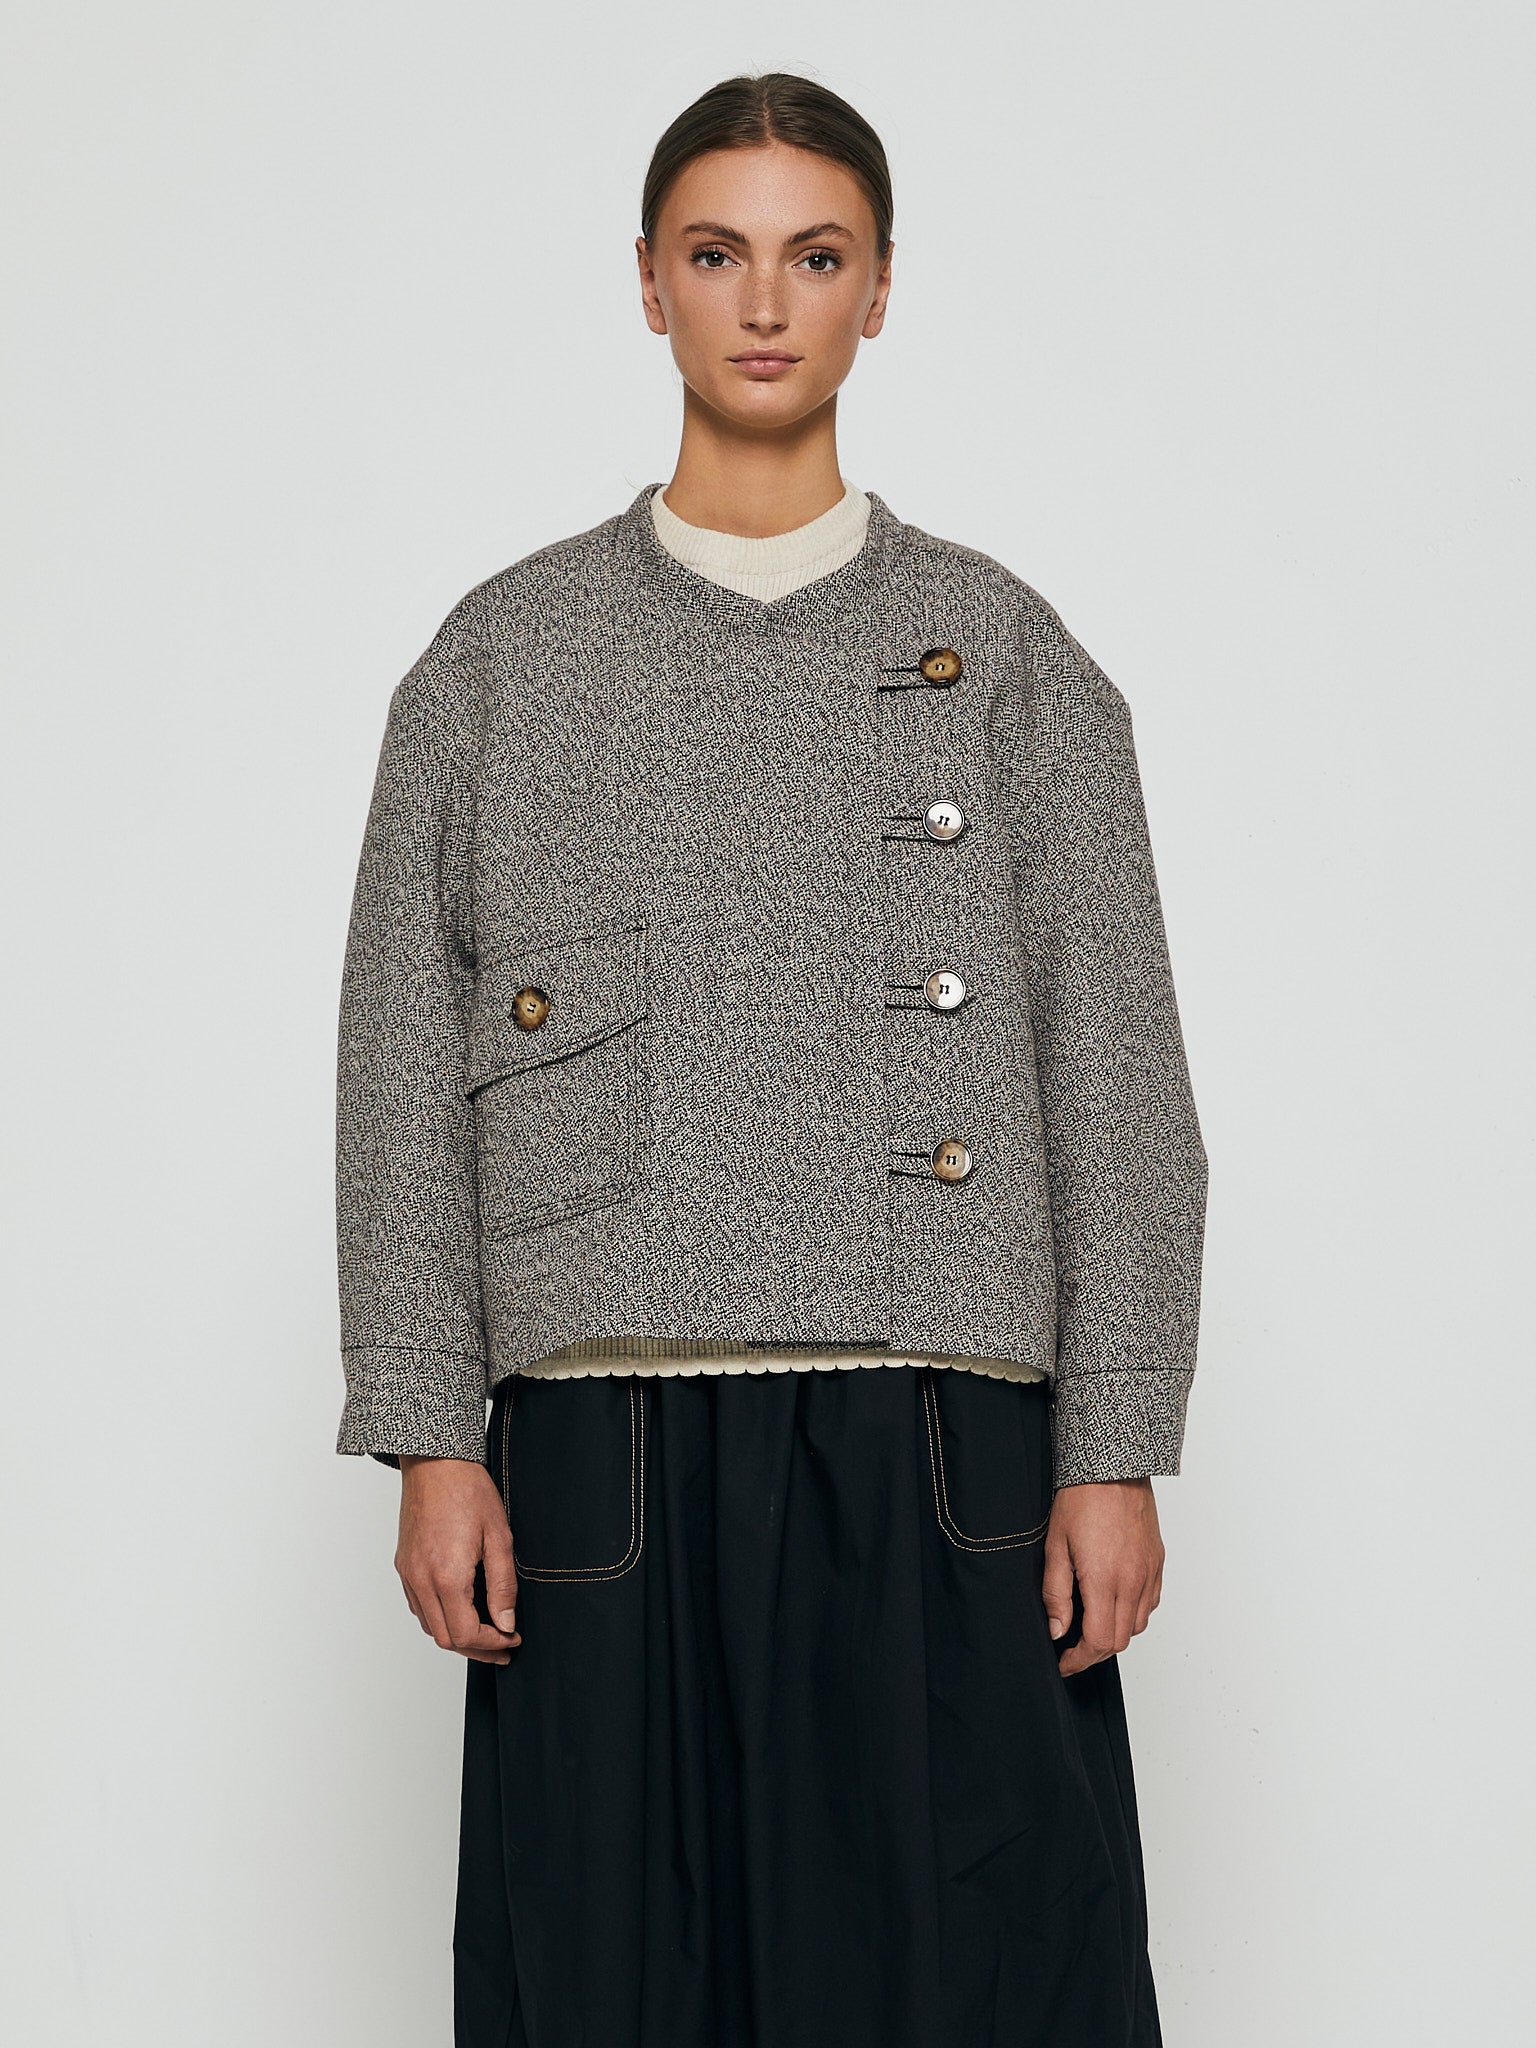 Proem Parades - Mimi Wool Jacket in Brown and Off White